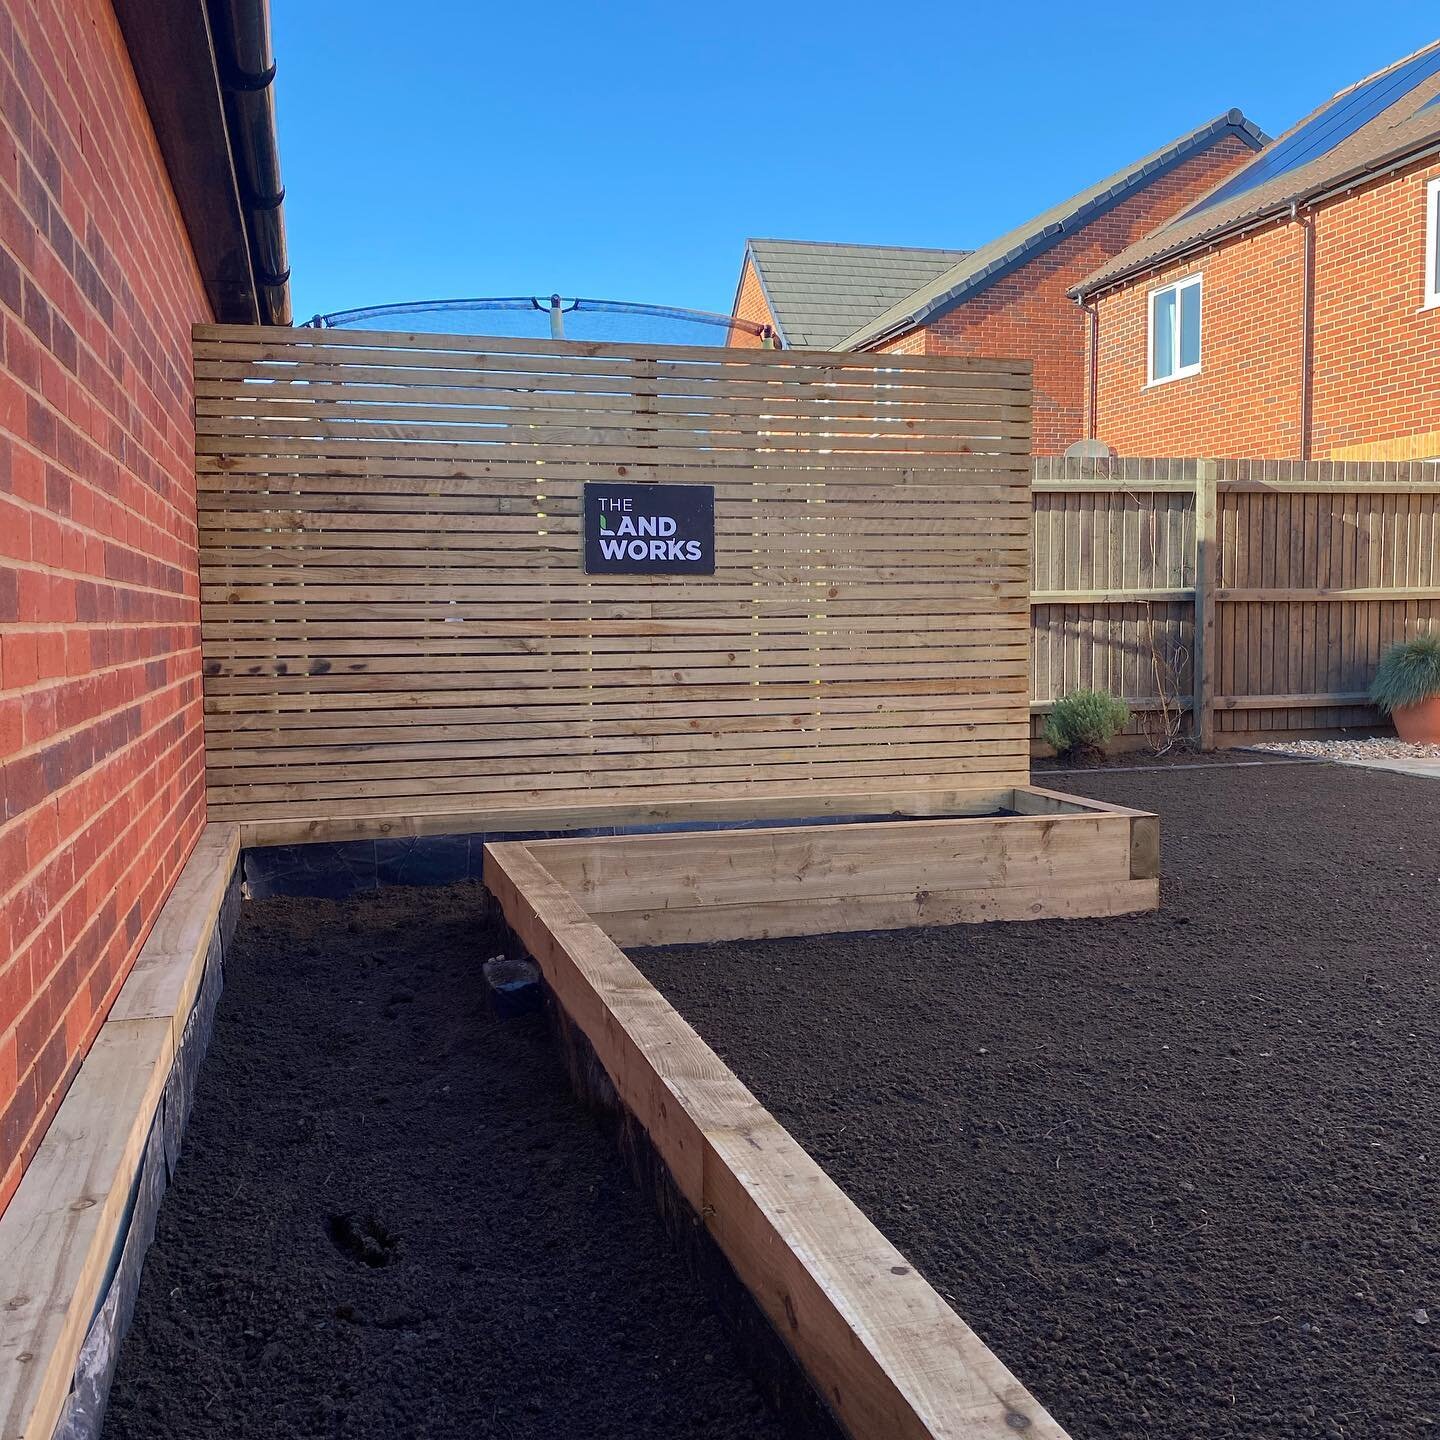 Our lastest waterbeach job finished this week. Big L-shaped raised beds - contemporary screening - patio extension - charcoal edgings - stones - 7ton of top soil ⚒ looking forward to seeing it planted up and seeded 🌱 #thelandworks #waterbeach #lands